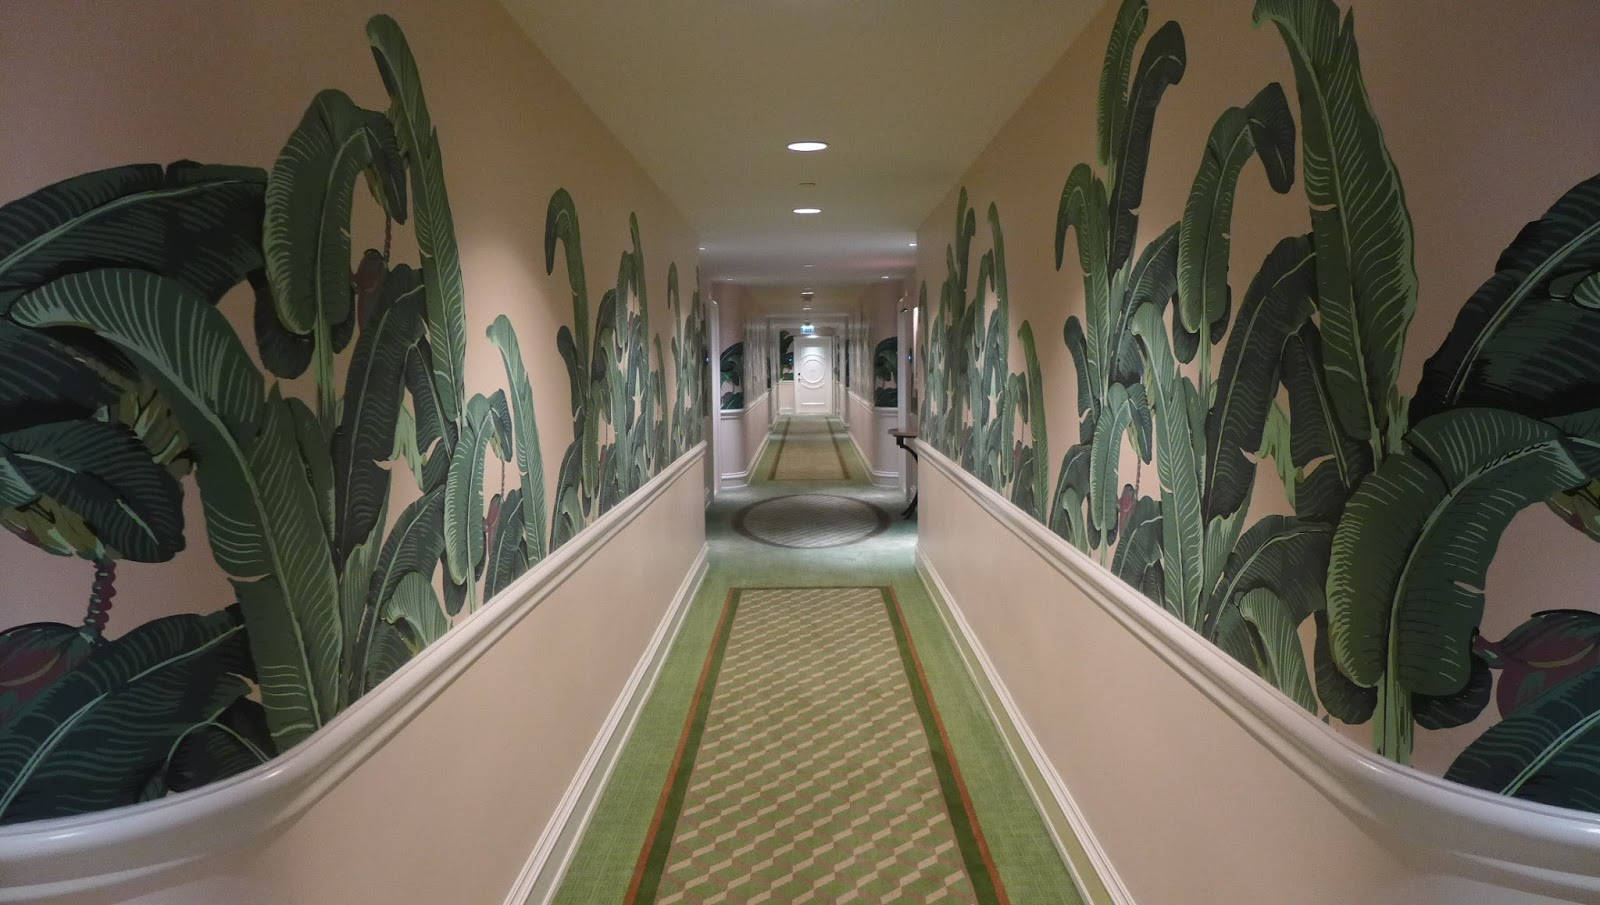 Hall Way of Beverly Hills Hotel Wallpaper